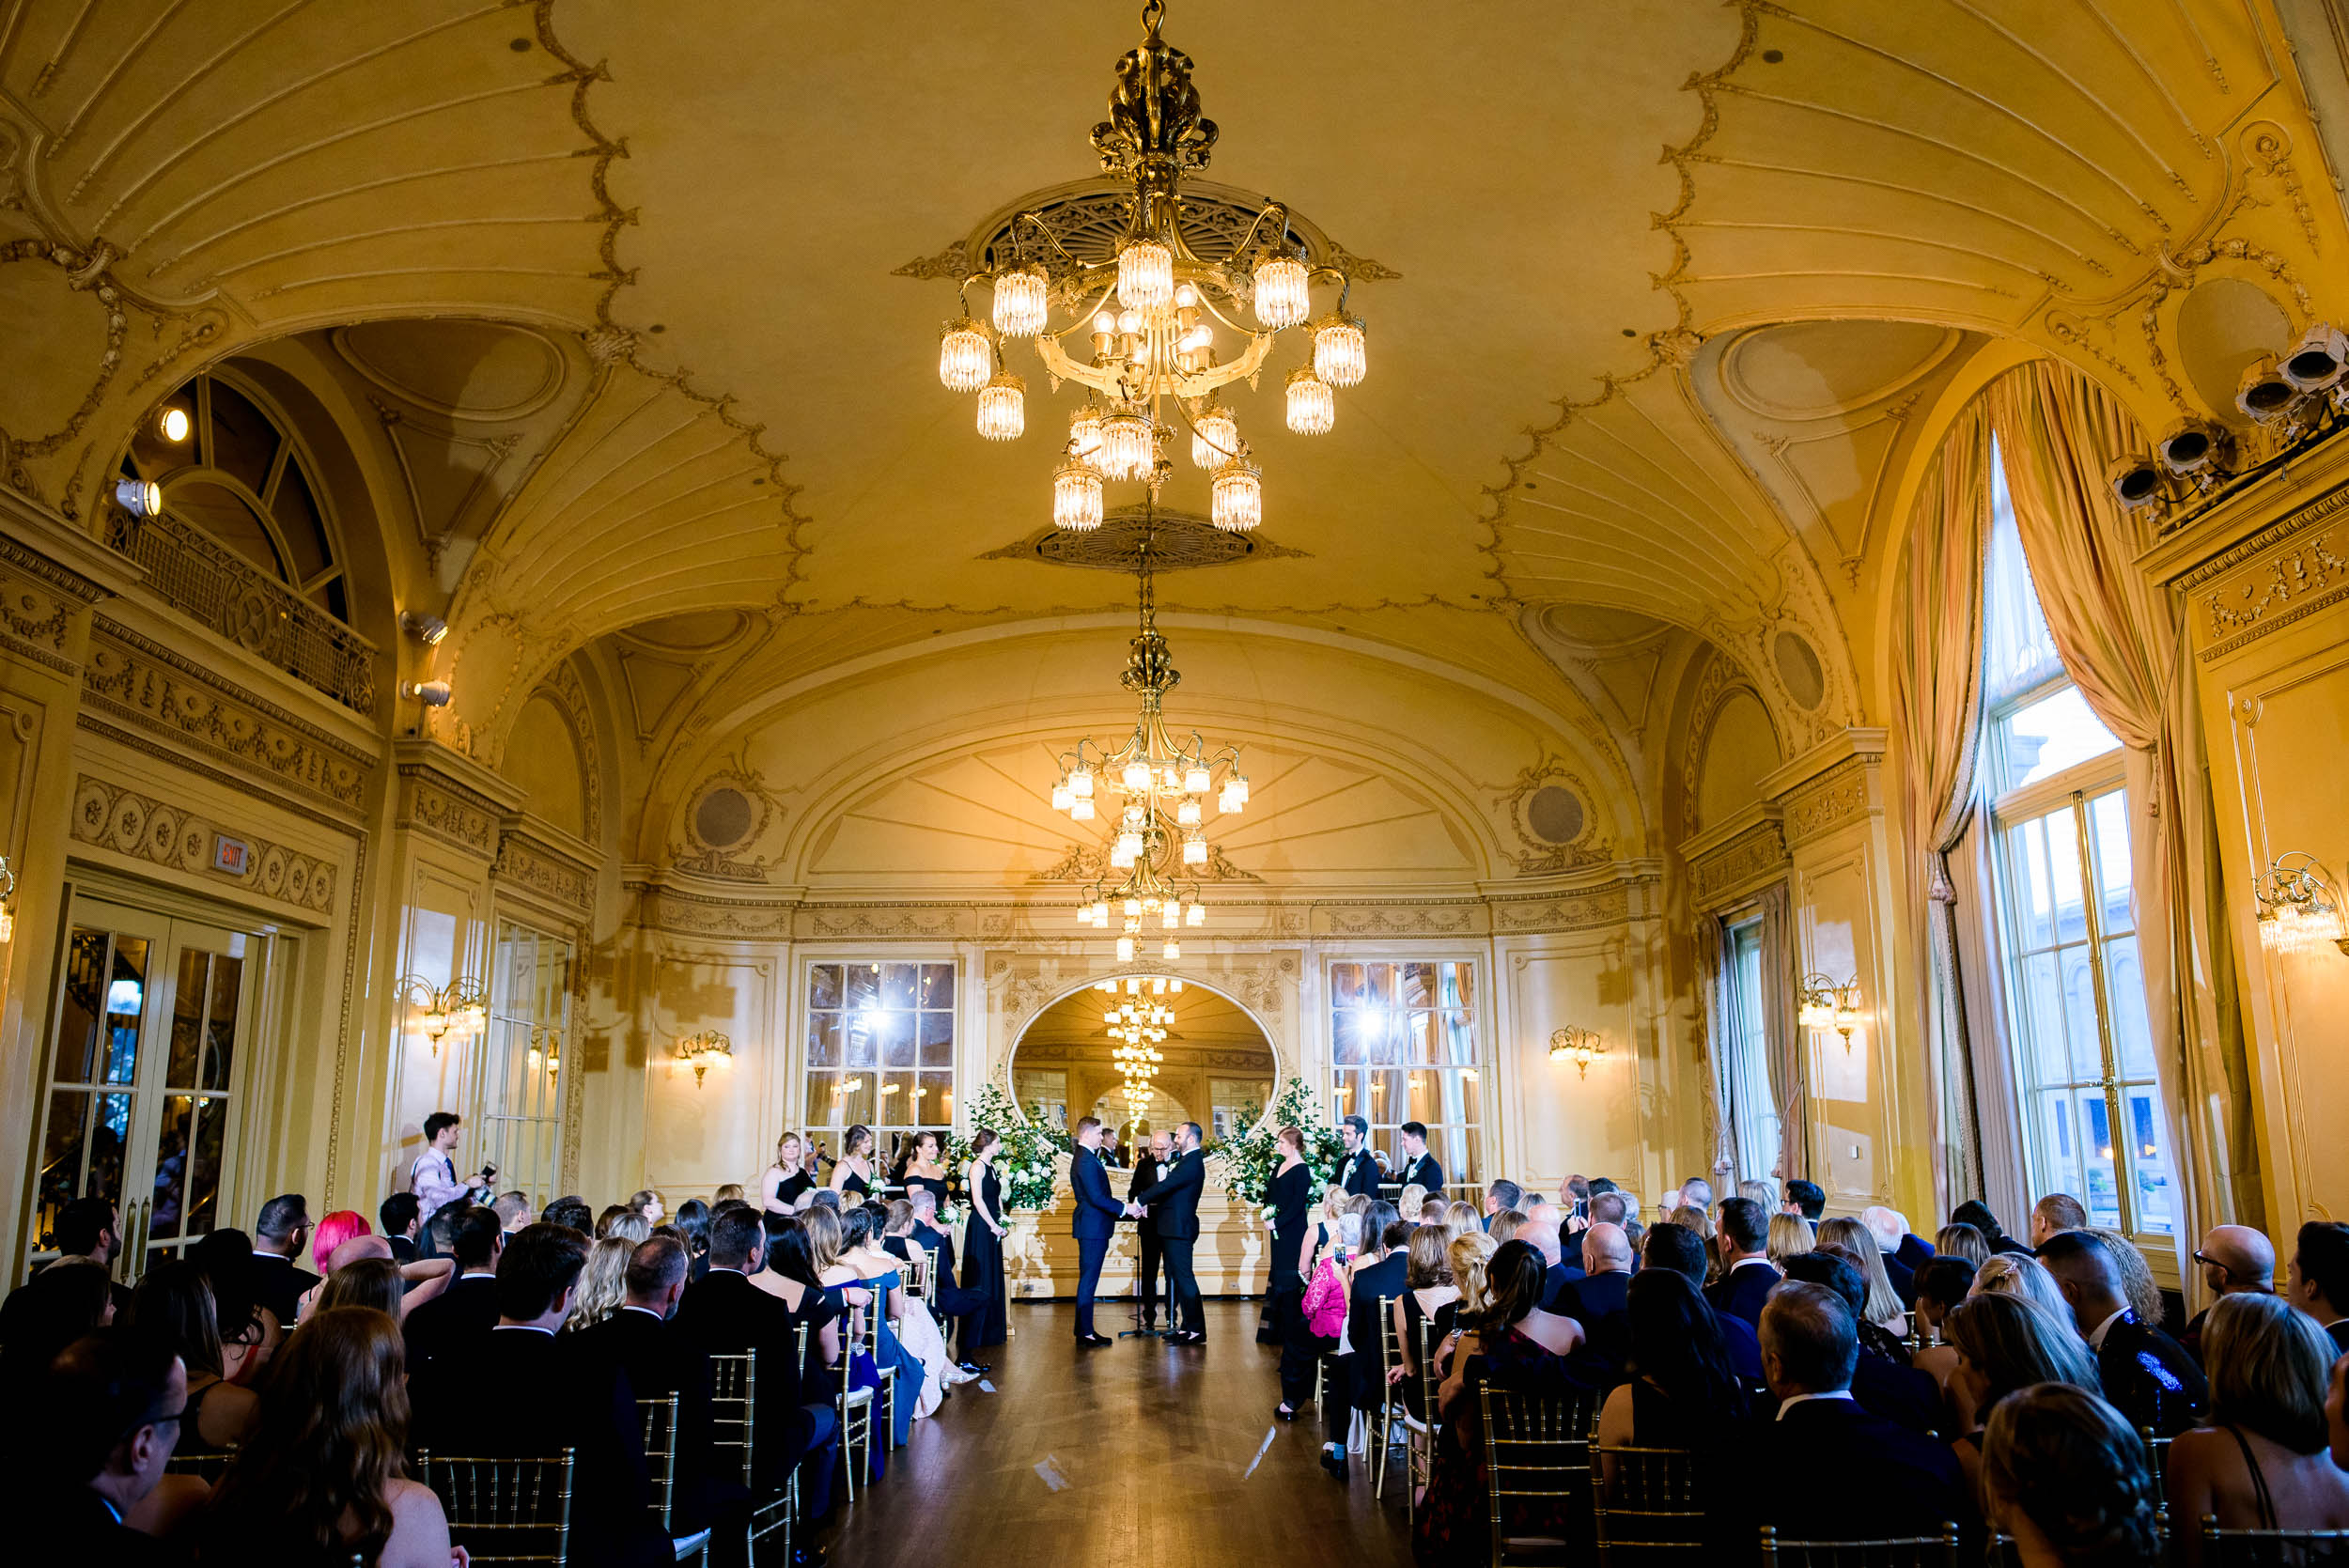 High-end wedding details for luxurious fall wedding at the Chicago Symphony Center captured by J. Brown Photography. See more wedding ideas at jbrownphotography.com!